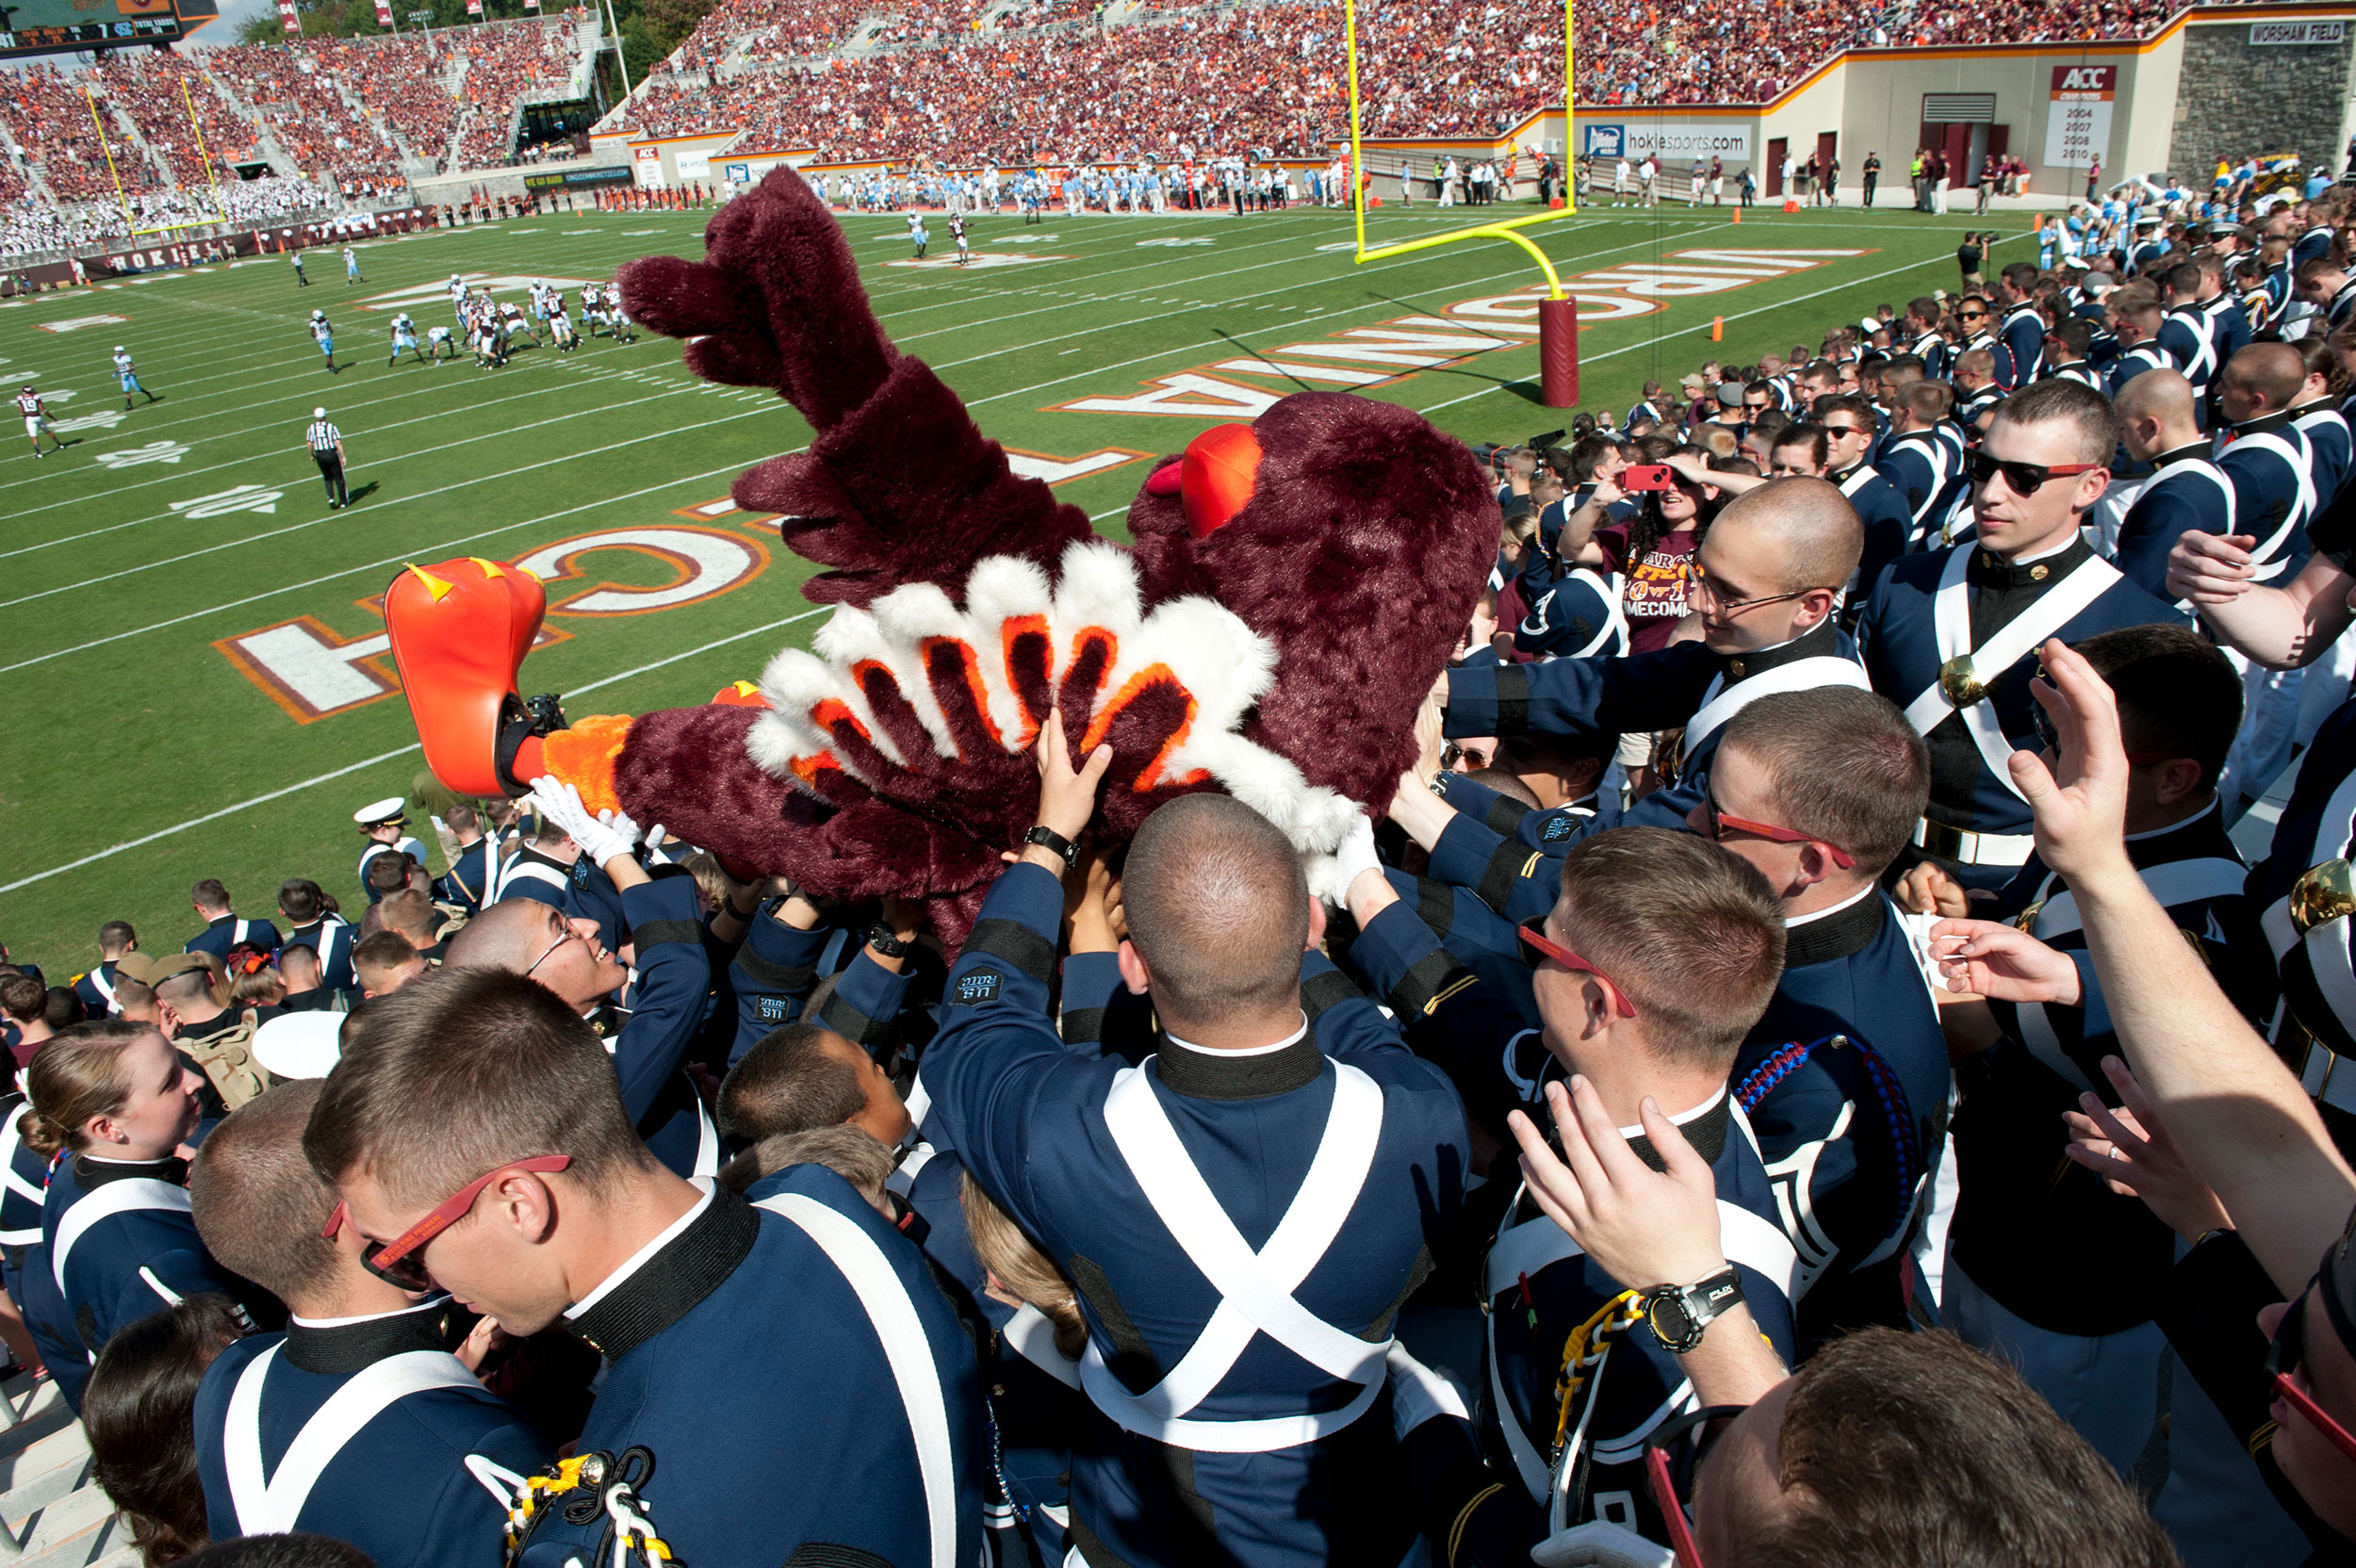 The Hokie bird crowd surfs up the Corps of Cadets student section during the Homecoming game against North Carolina.